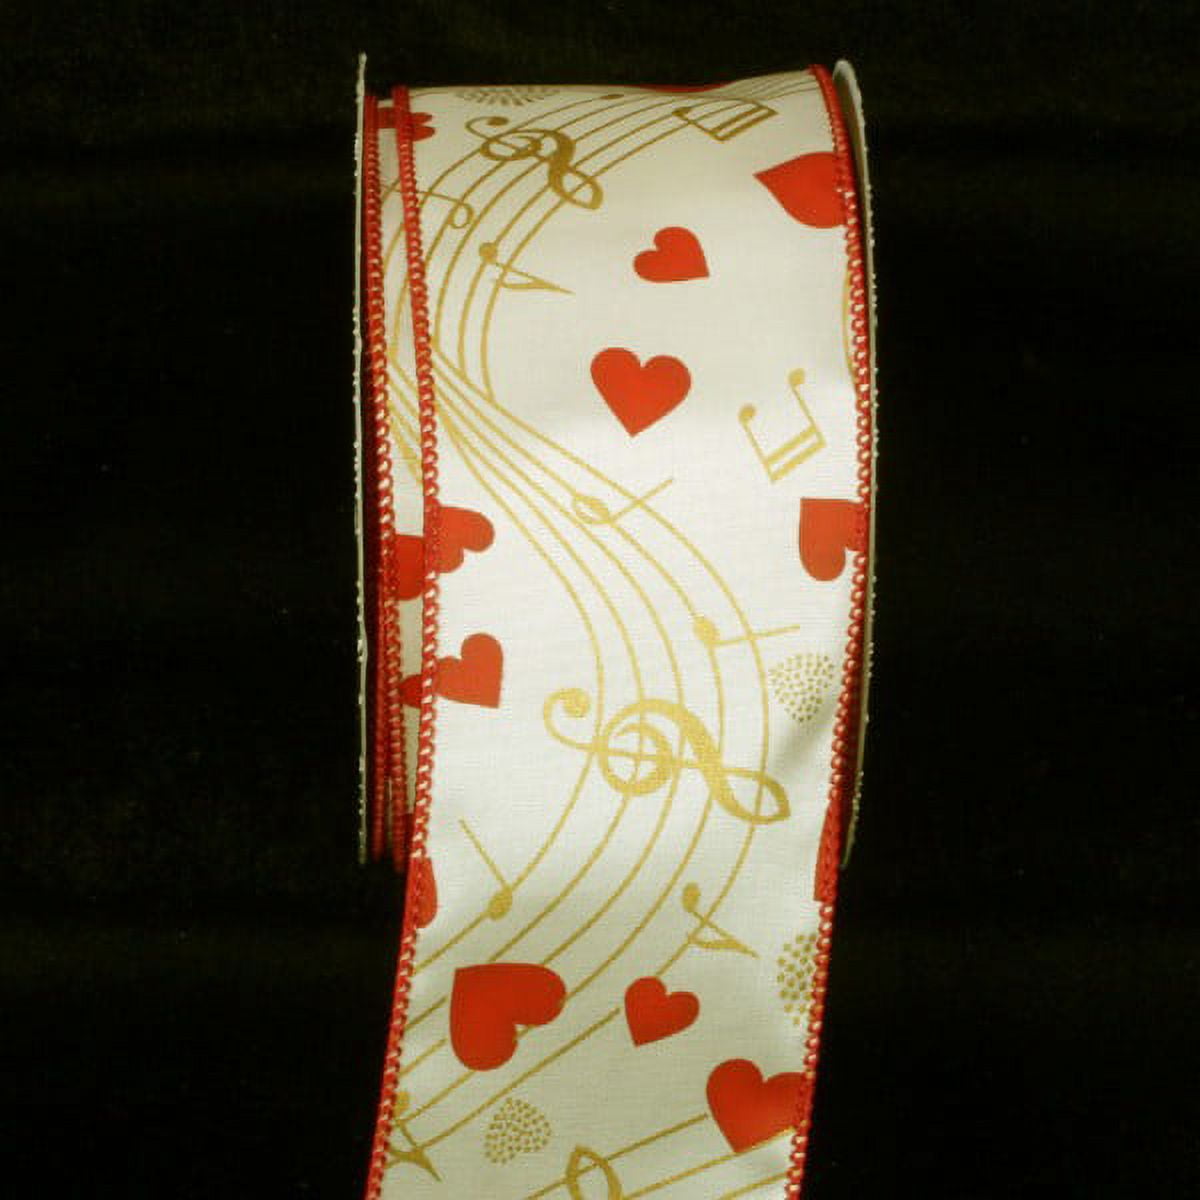 The Ribbon People Red and White Flock Valentine Day Wired Craft Ribbon 2 x  20 Yards